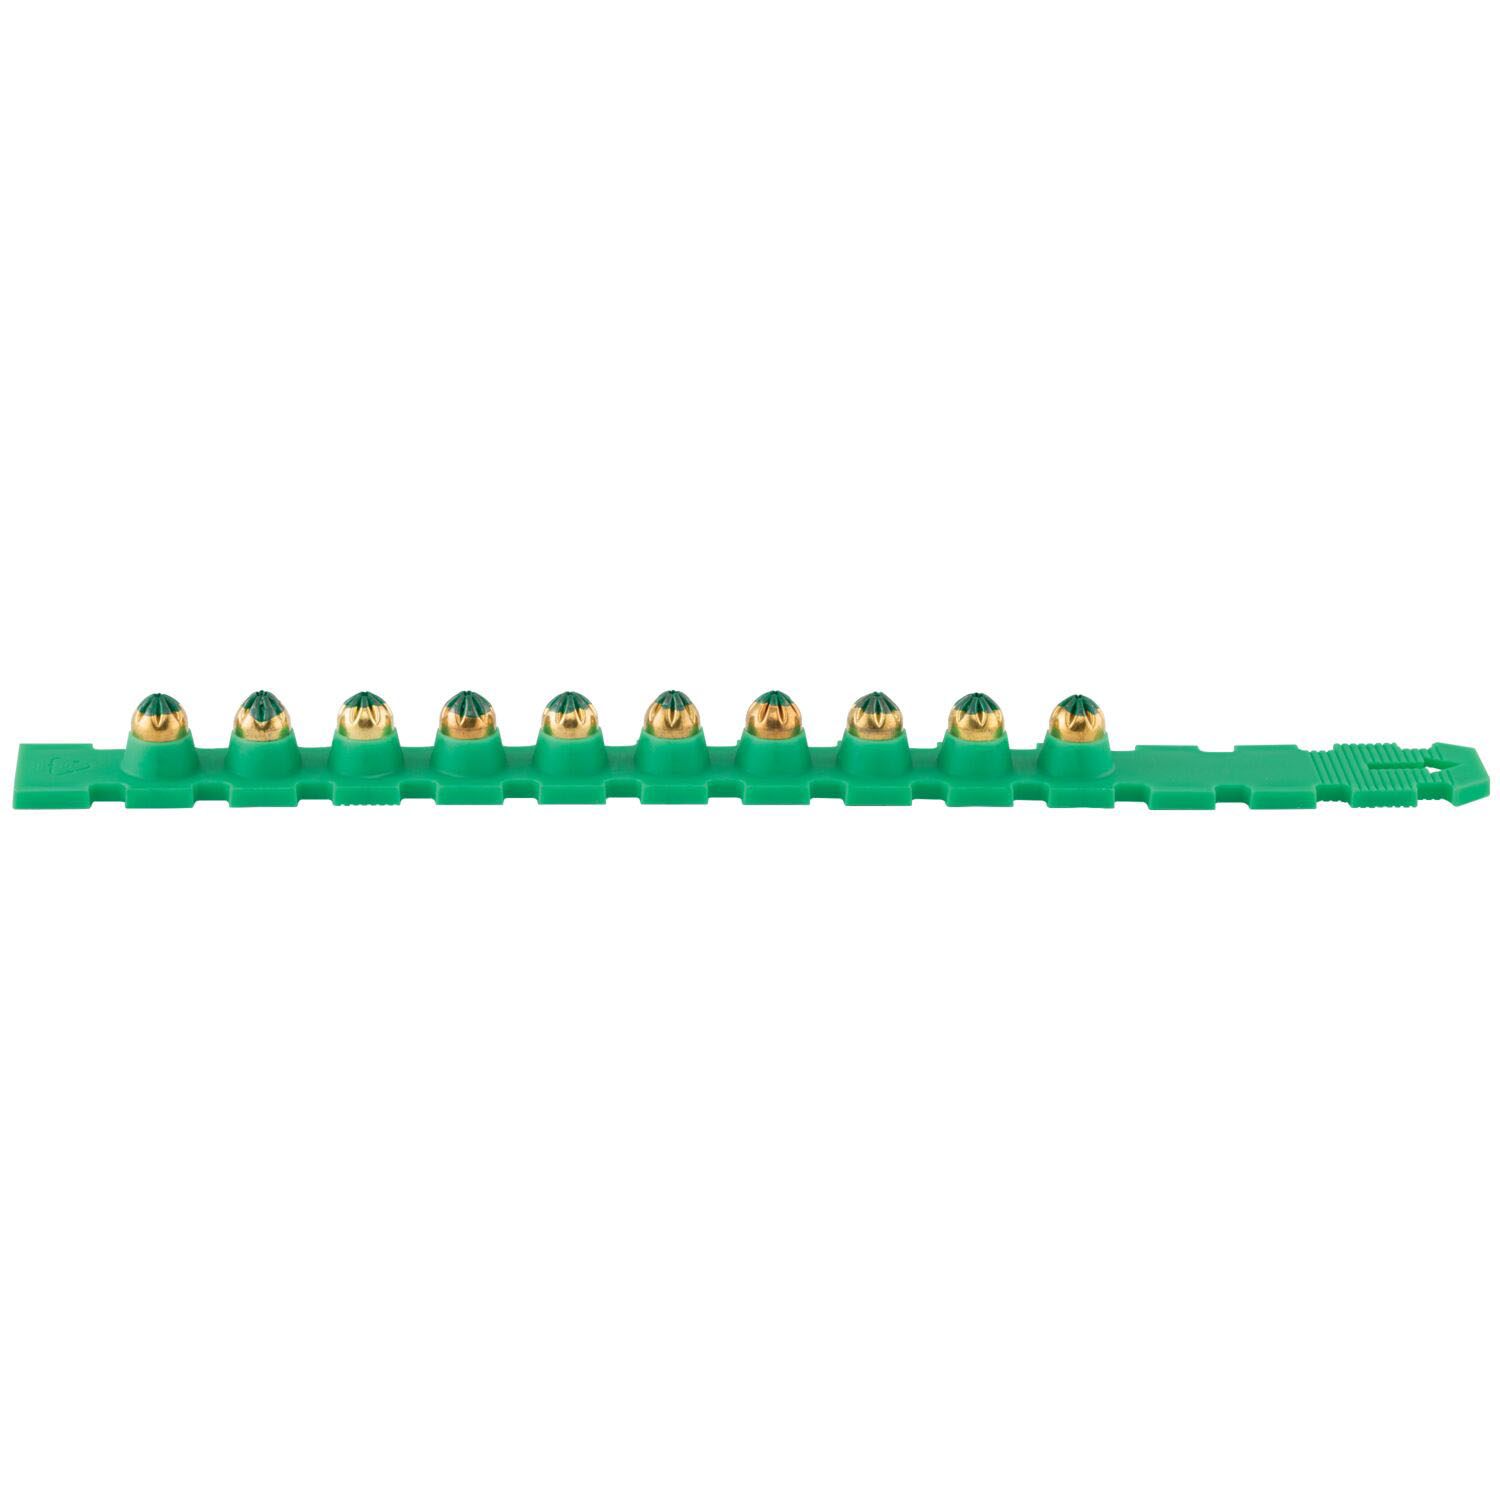 0.27 CALIBER SHORT SAFETY STRIP LOAD GREEN BOOSTERS 100 BOX